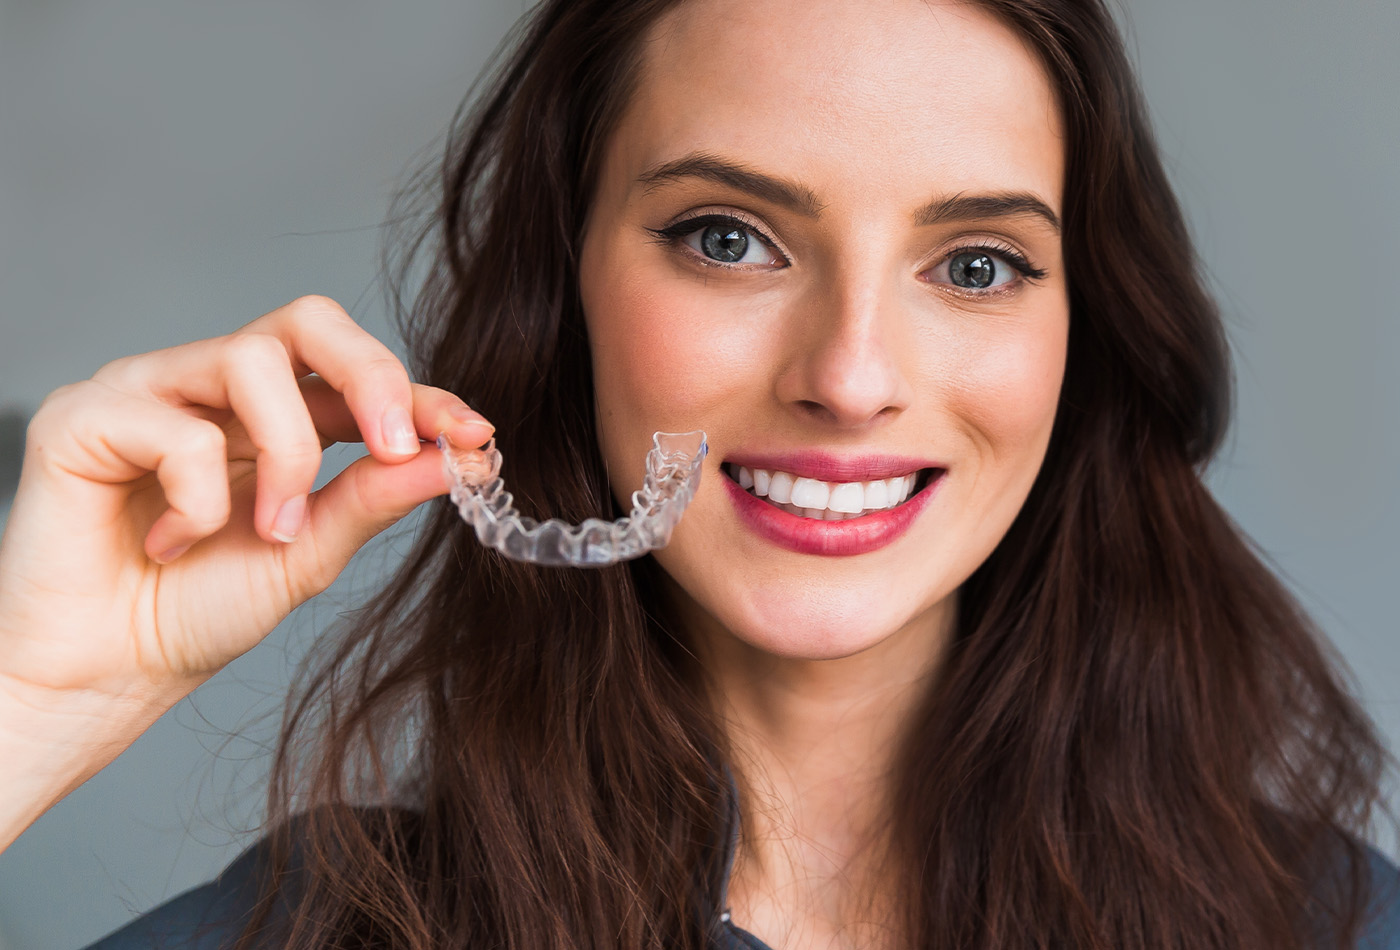 How to Maintain Good Oral Hygiene With Braces?